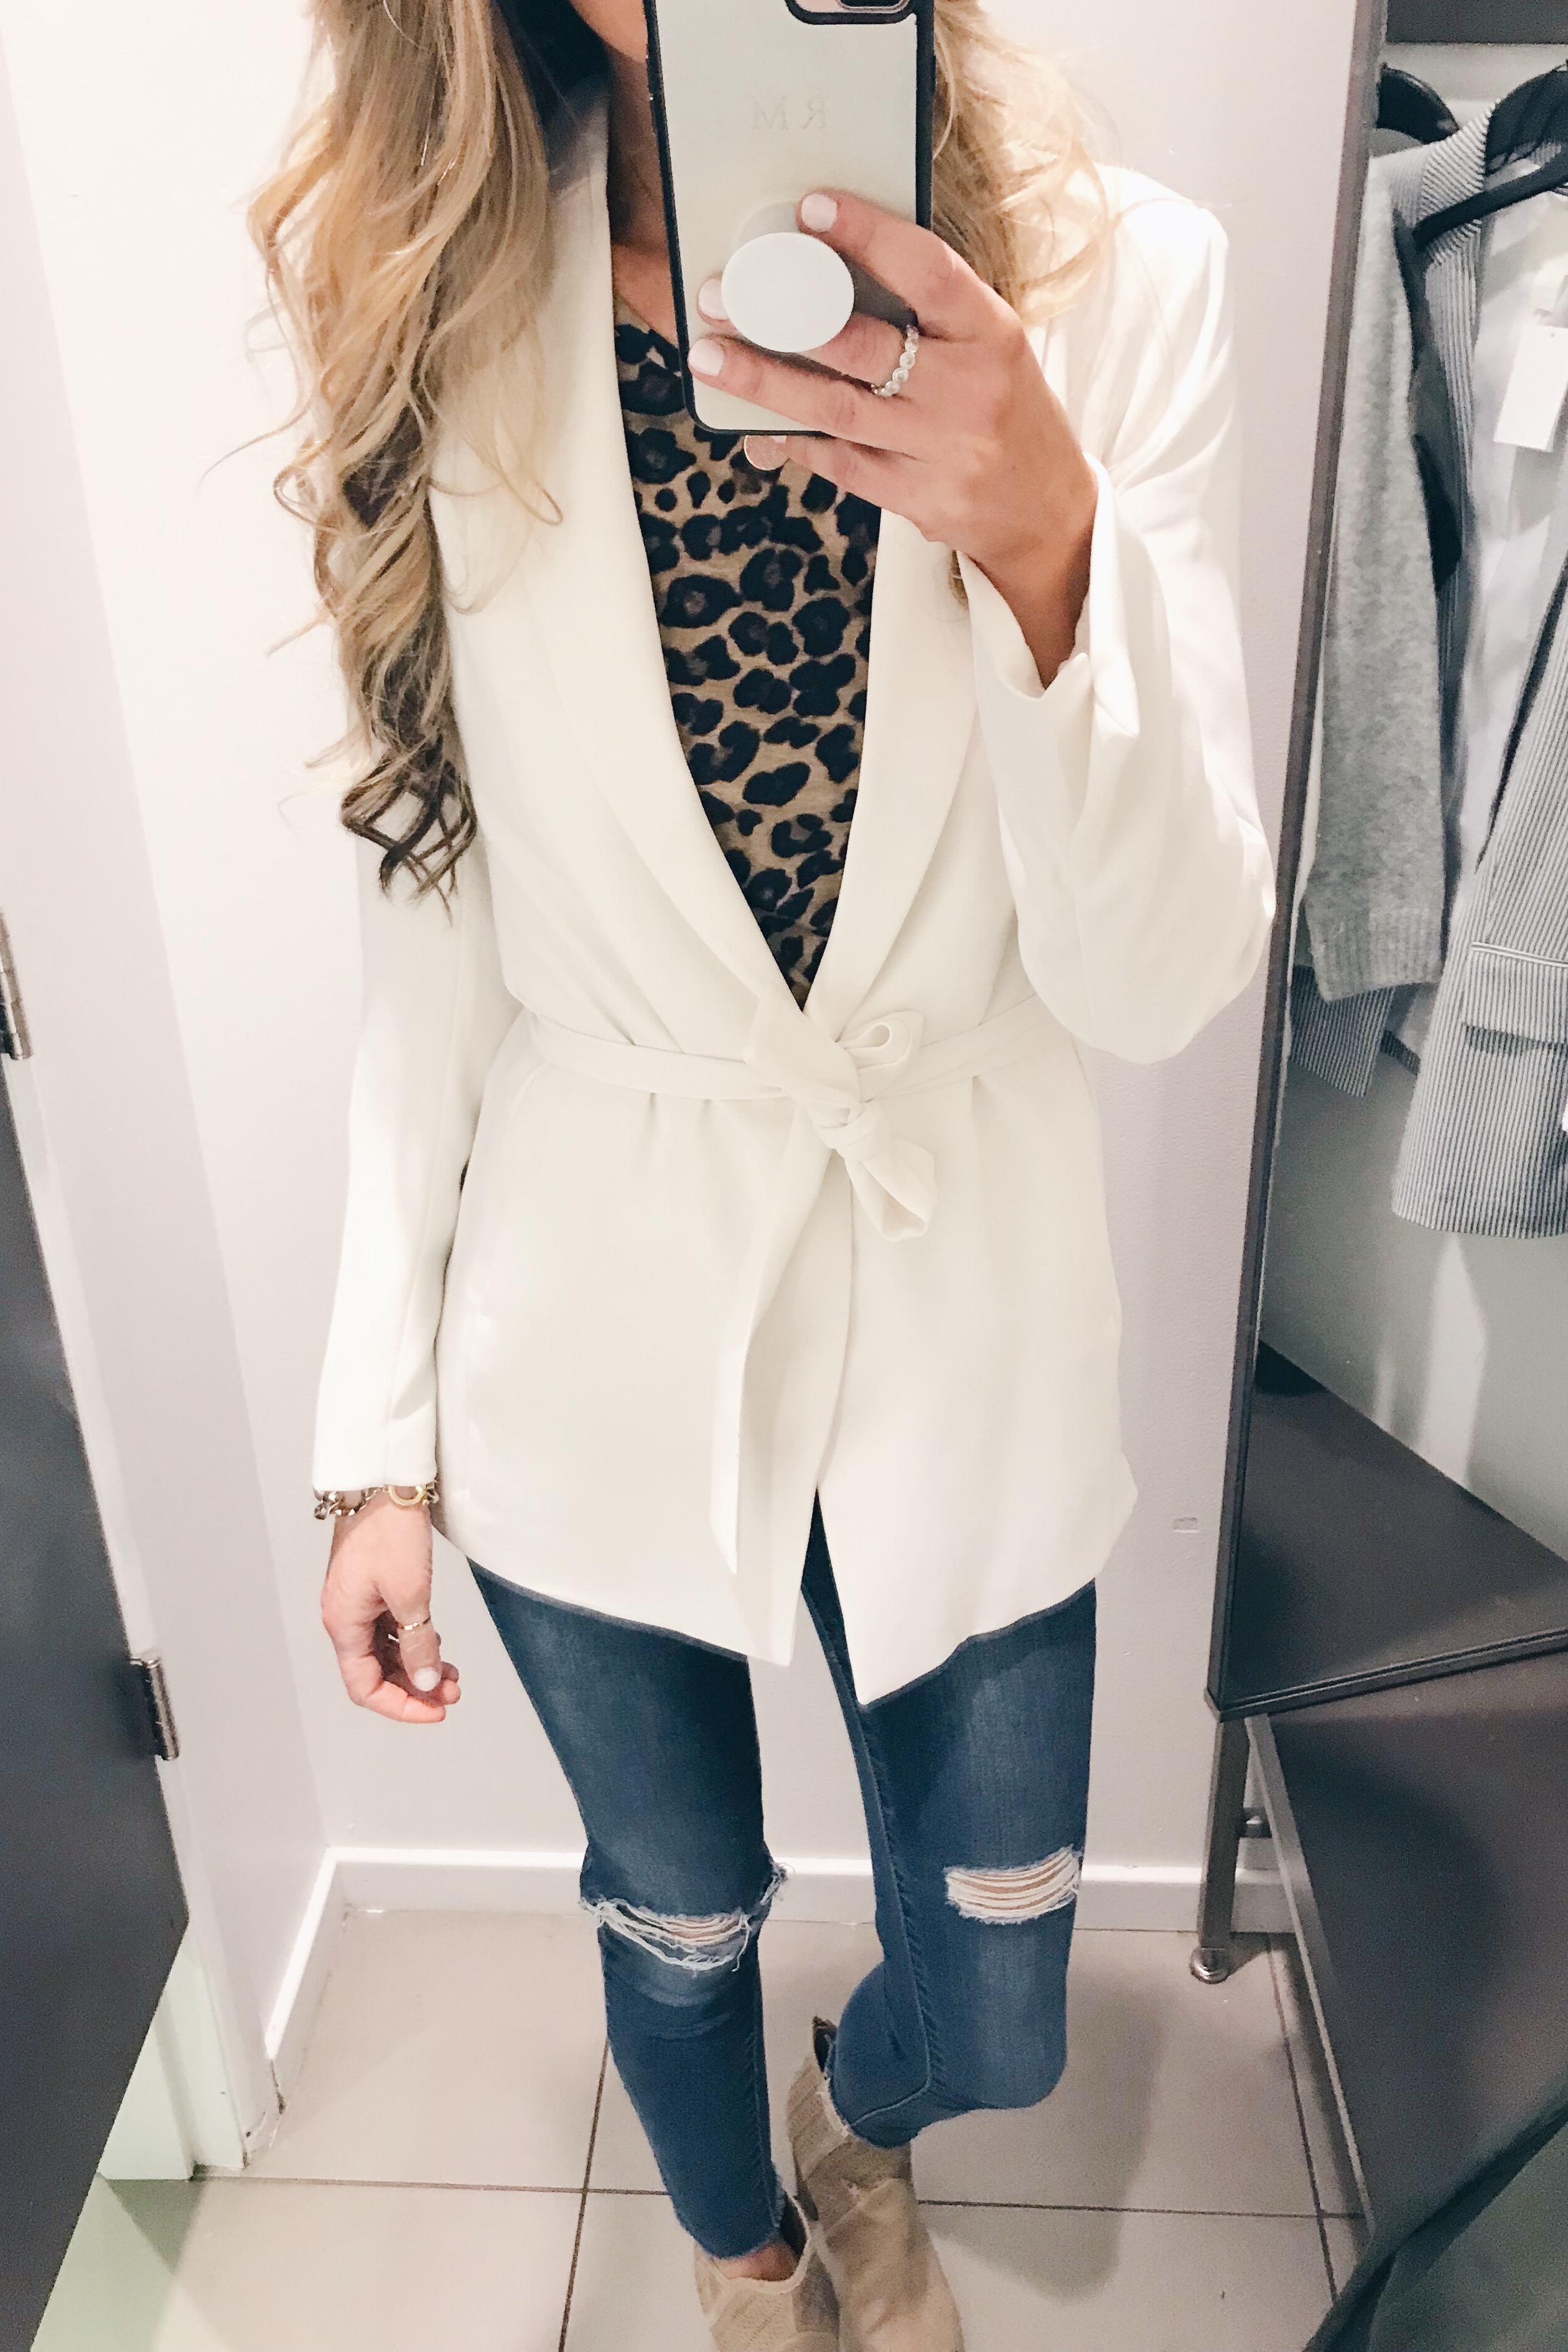 h&m try on - belted white blazer over leopard top on Pinteresting Plans fashion blog